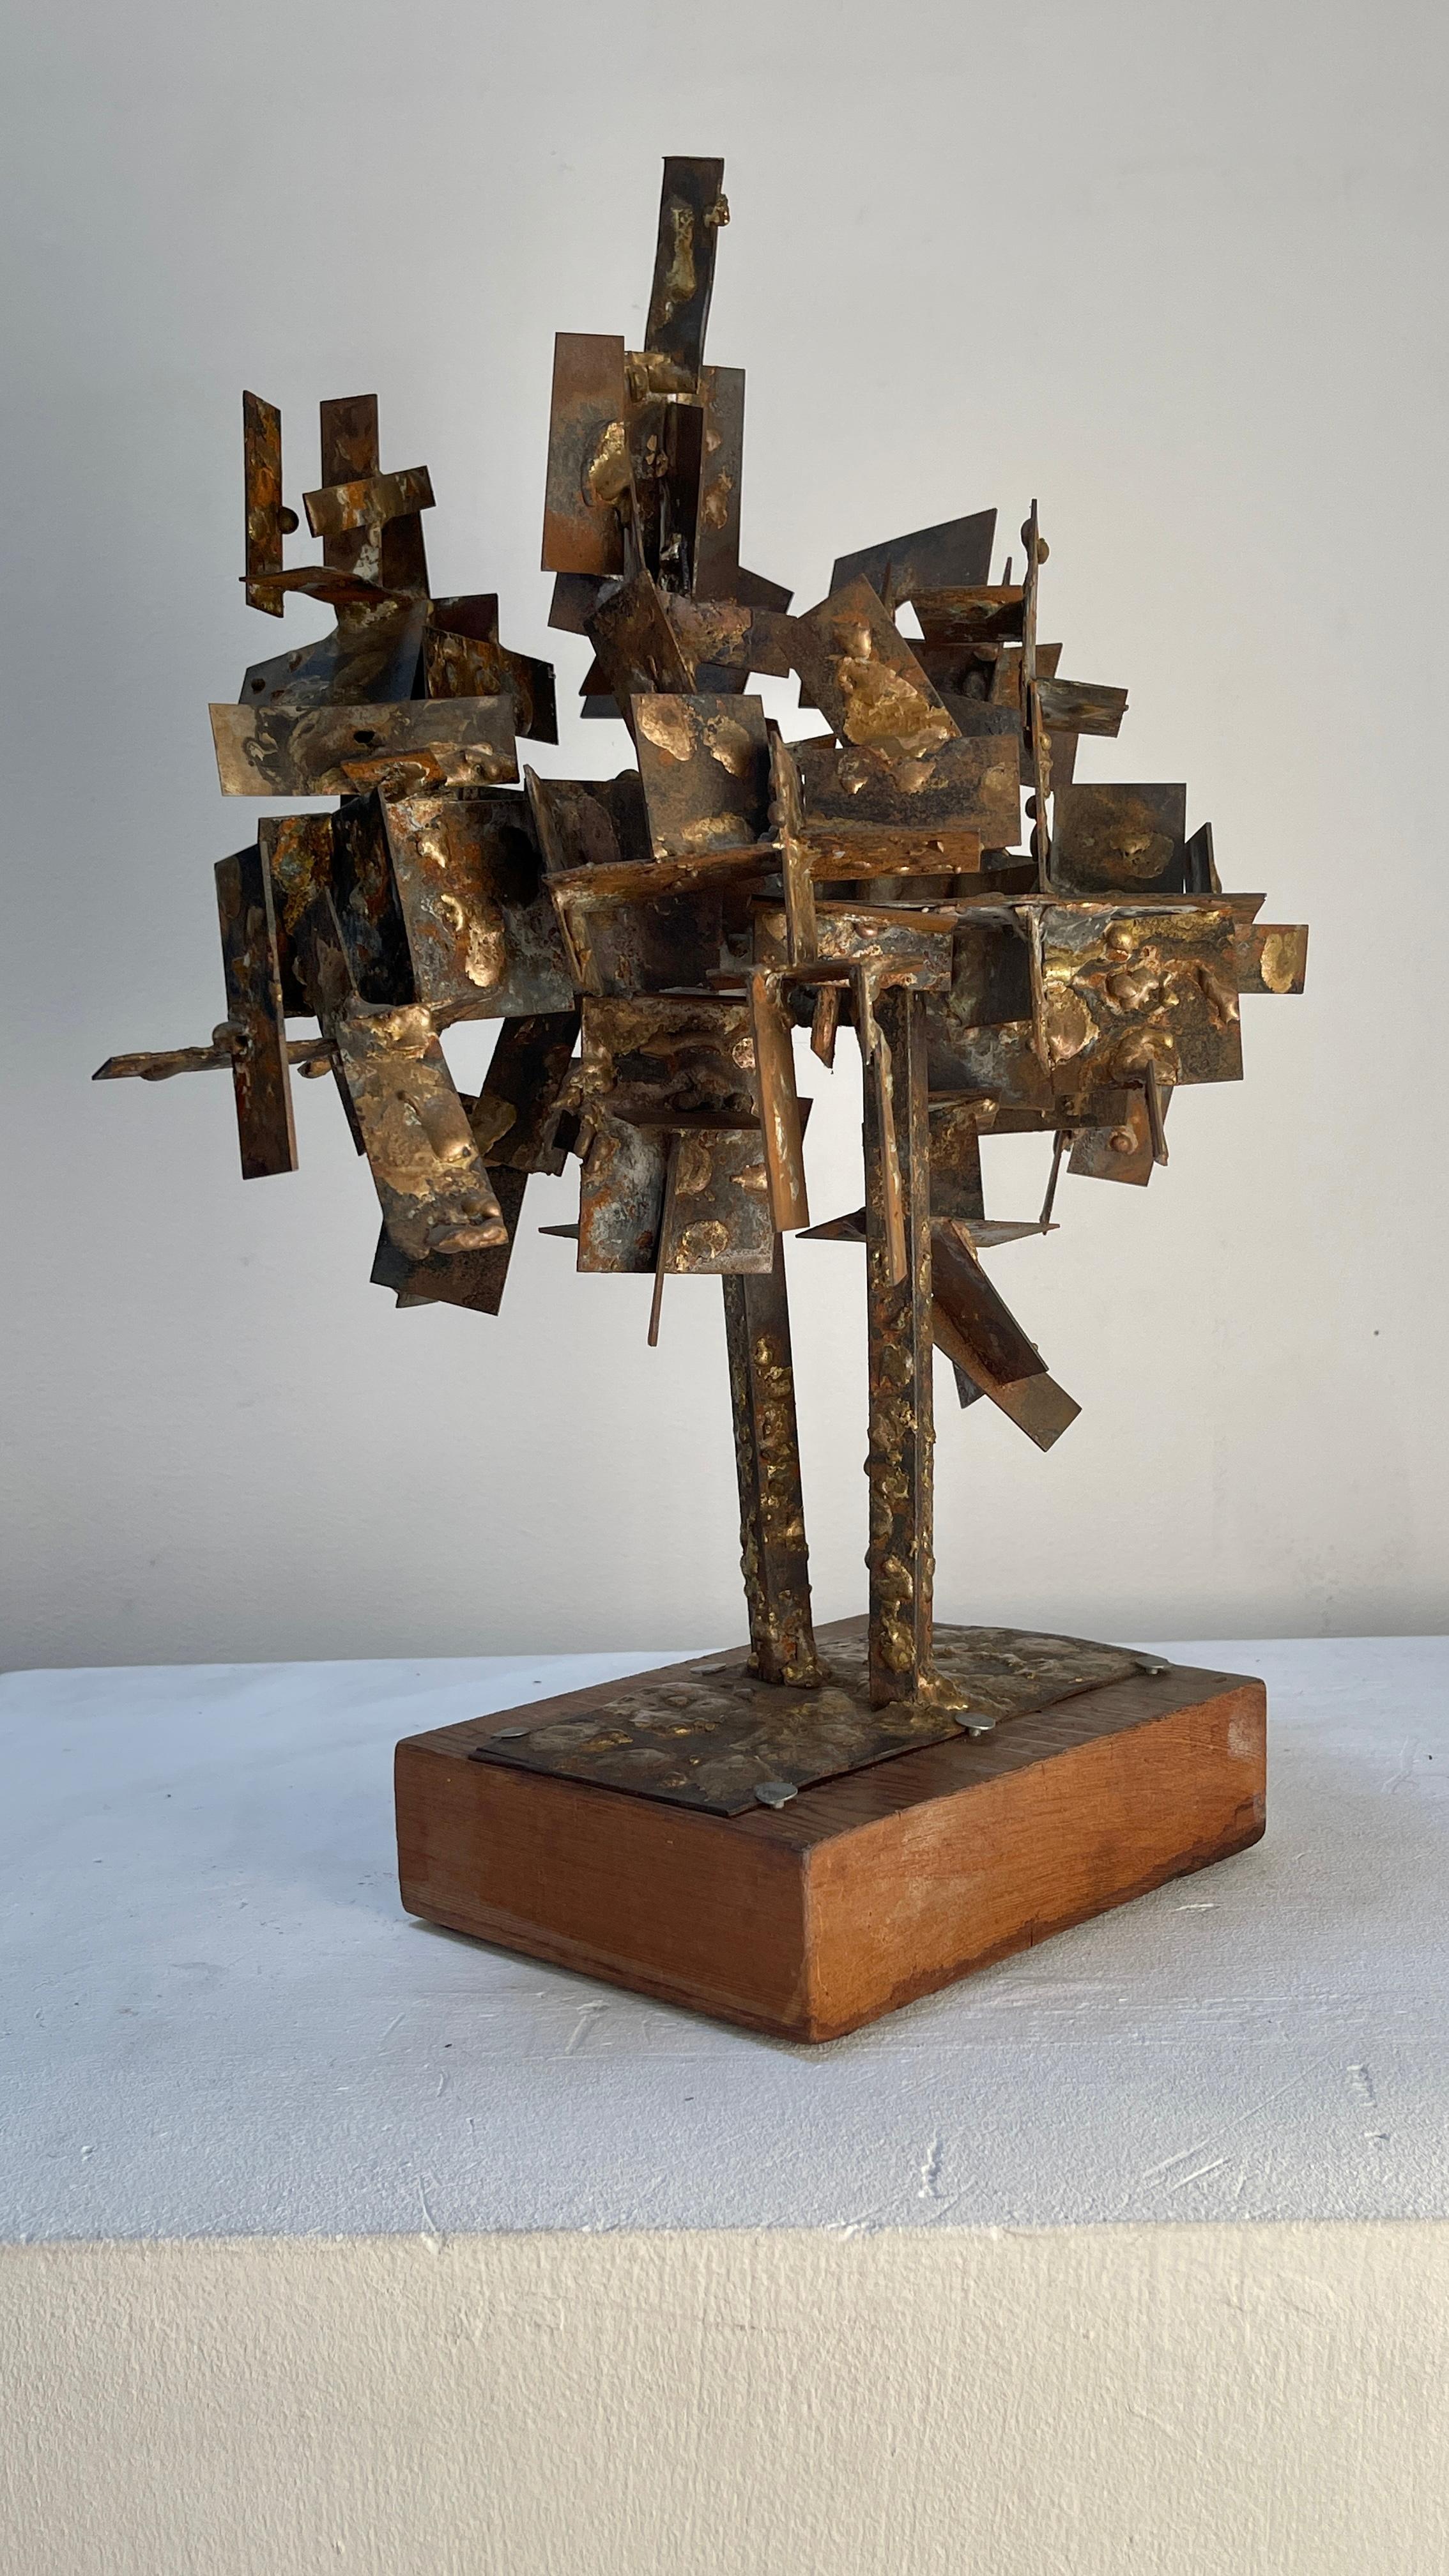 Florence Arnold (American, 1900-1994) brutalist welded metal sculpture (1960s) with walnut base.
    